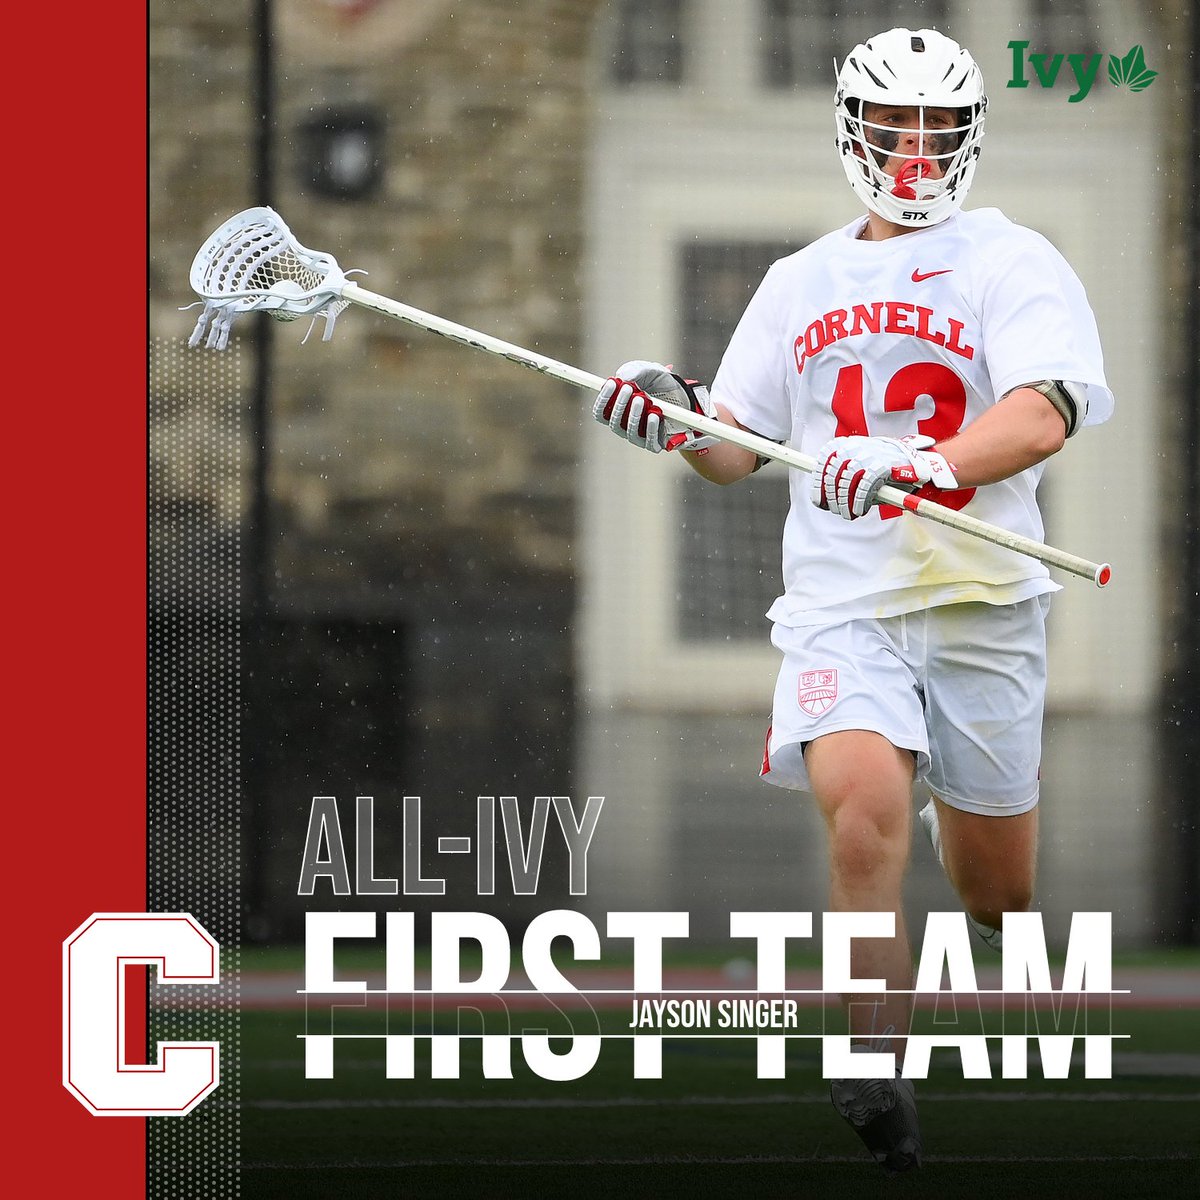 @CornellLacrosse @IvyLeague The first-team included three Big Red, including unanimous selection CJ Kirst 👀

#YellCornell